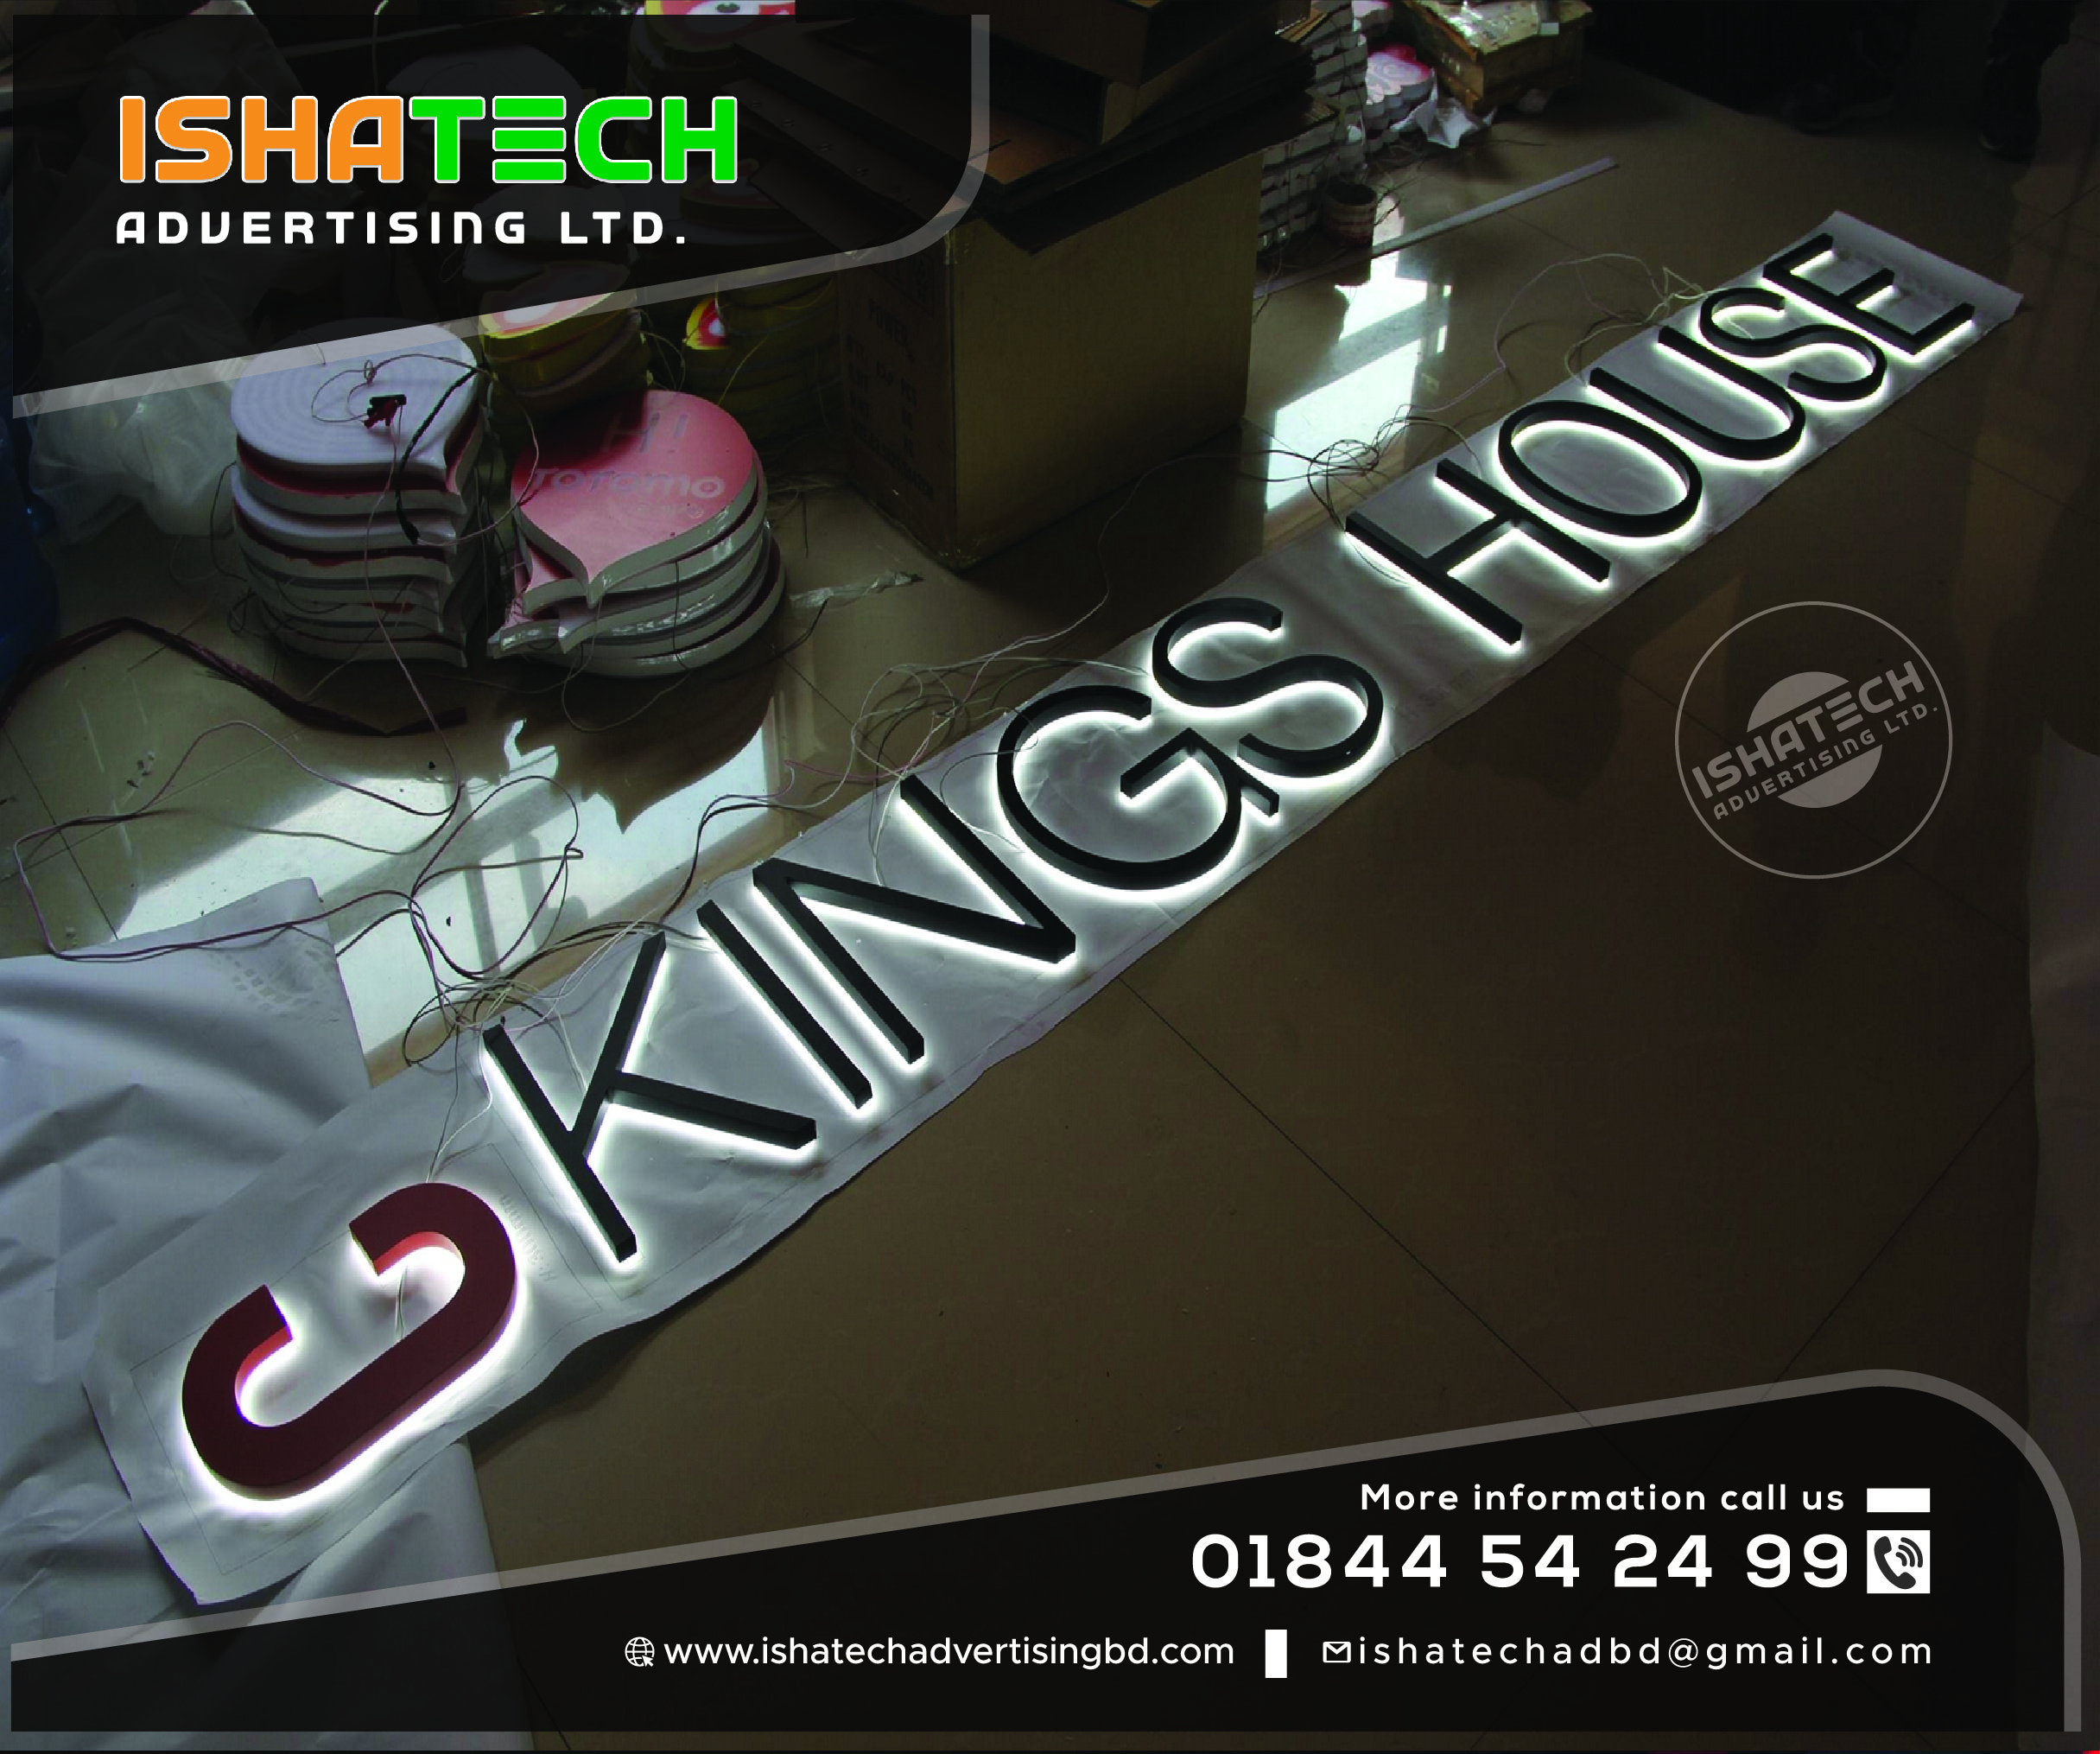 KINGS HOUSE LETTER SIGNAGE, SIGNAGE AGENCY IN DHAKA BANGLADESH, ISHATECH ADVERTISING AGENCY IN DHAAK BANGLADESH